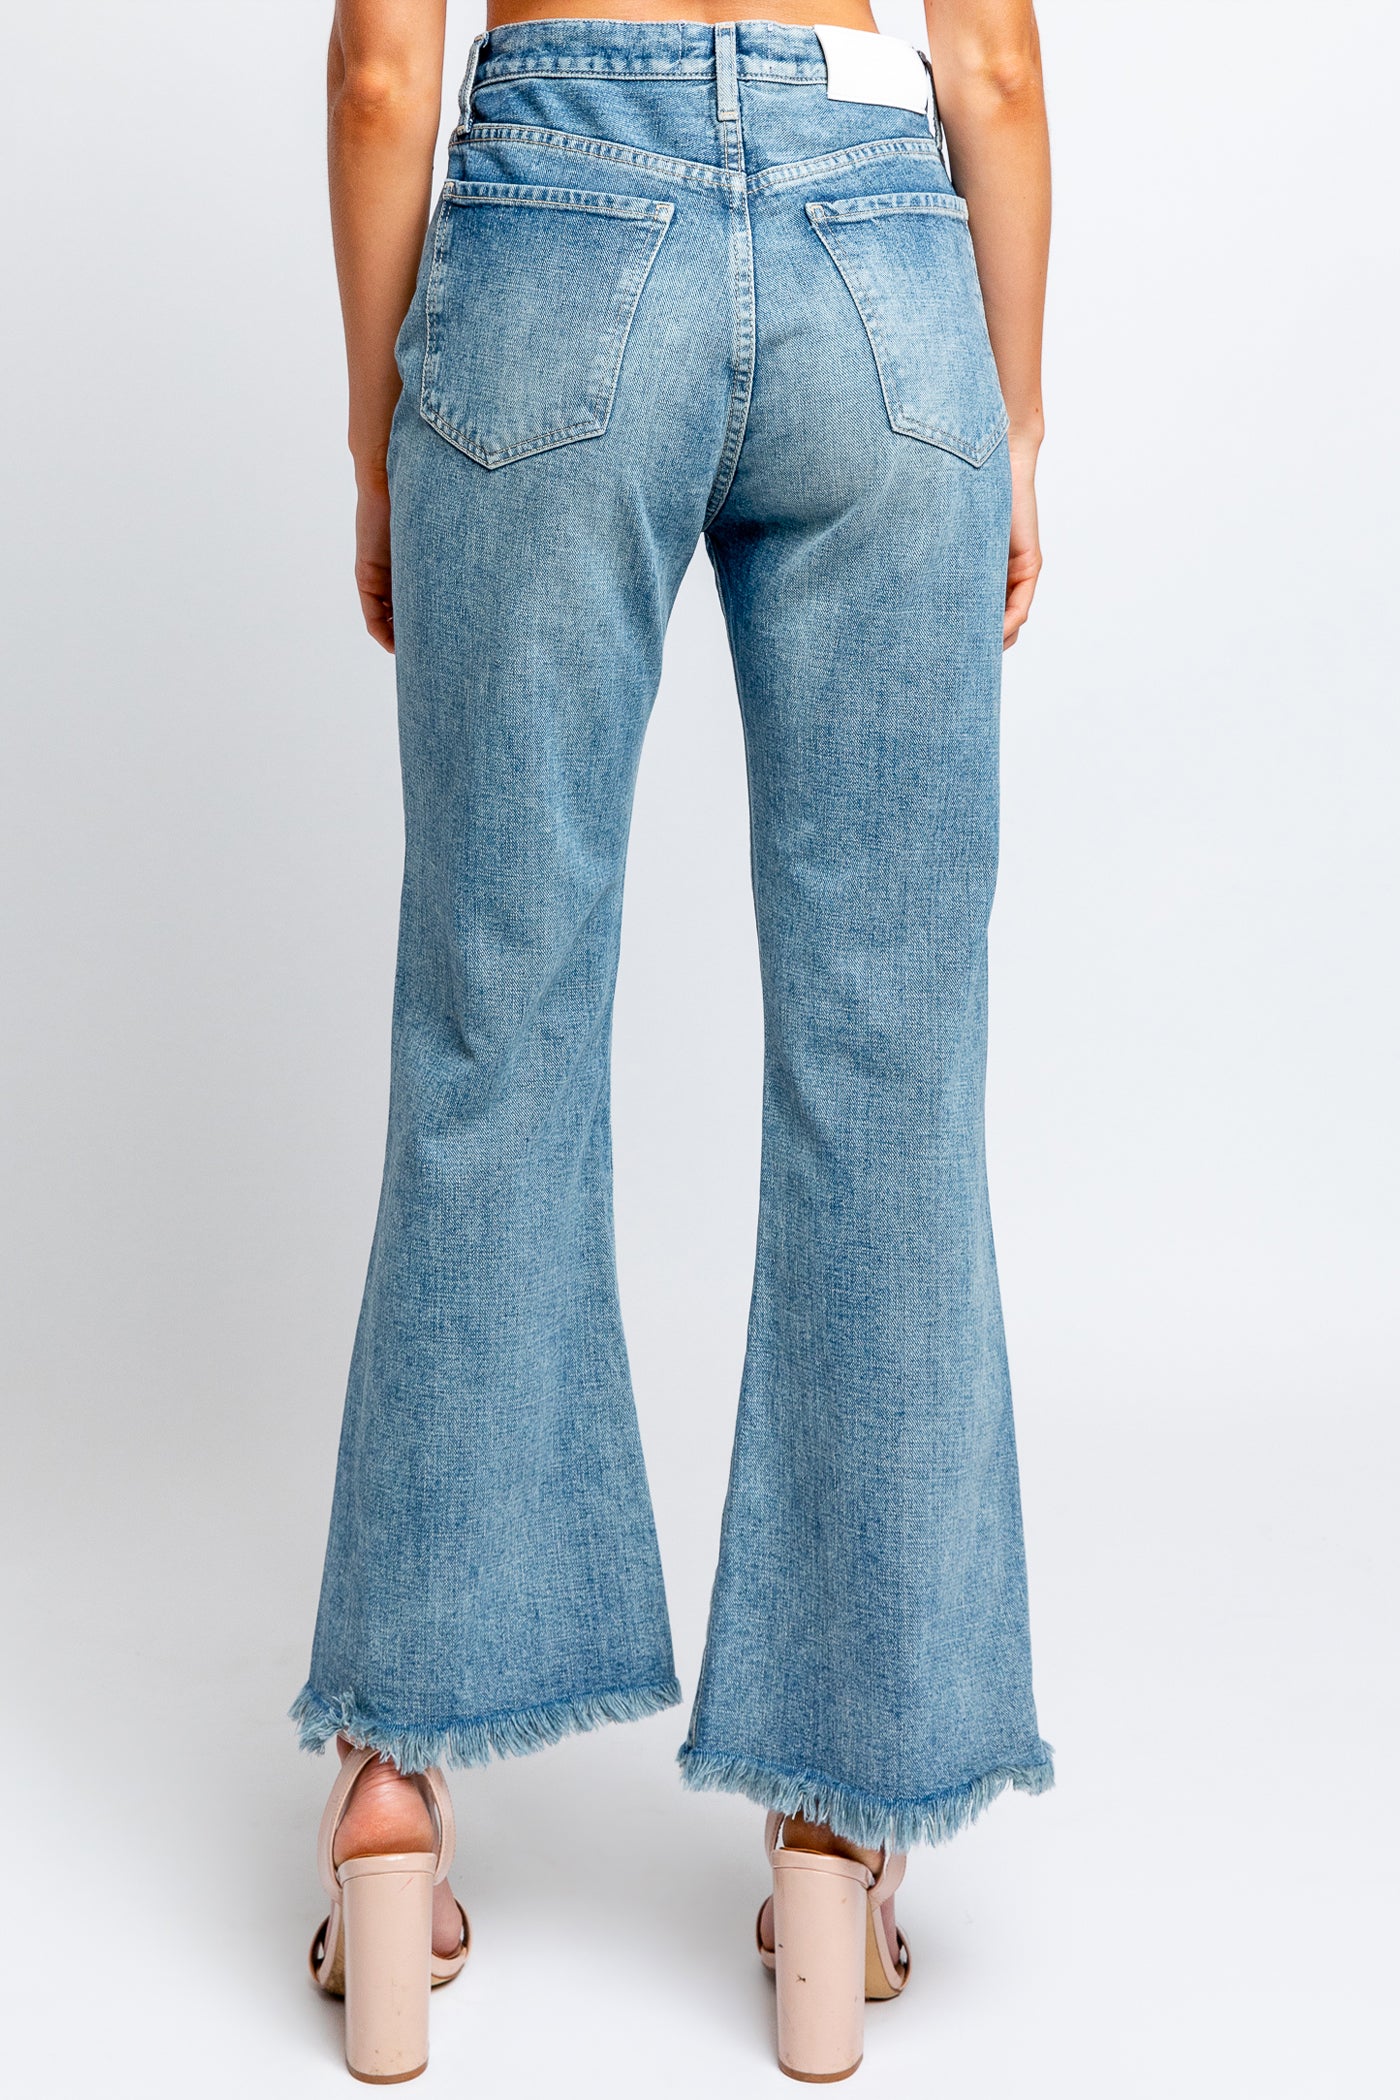 7 For All Mankind Easy Boy Bootcut